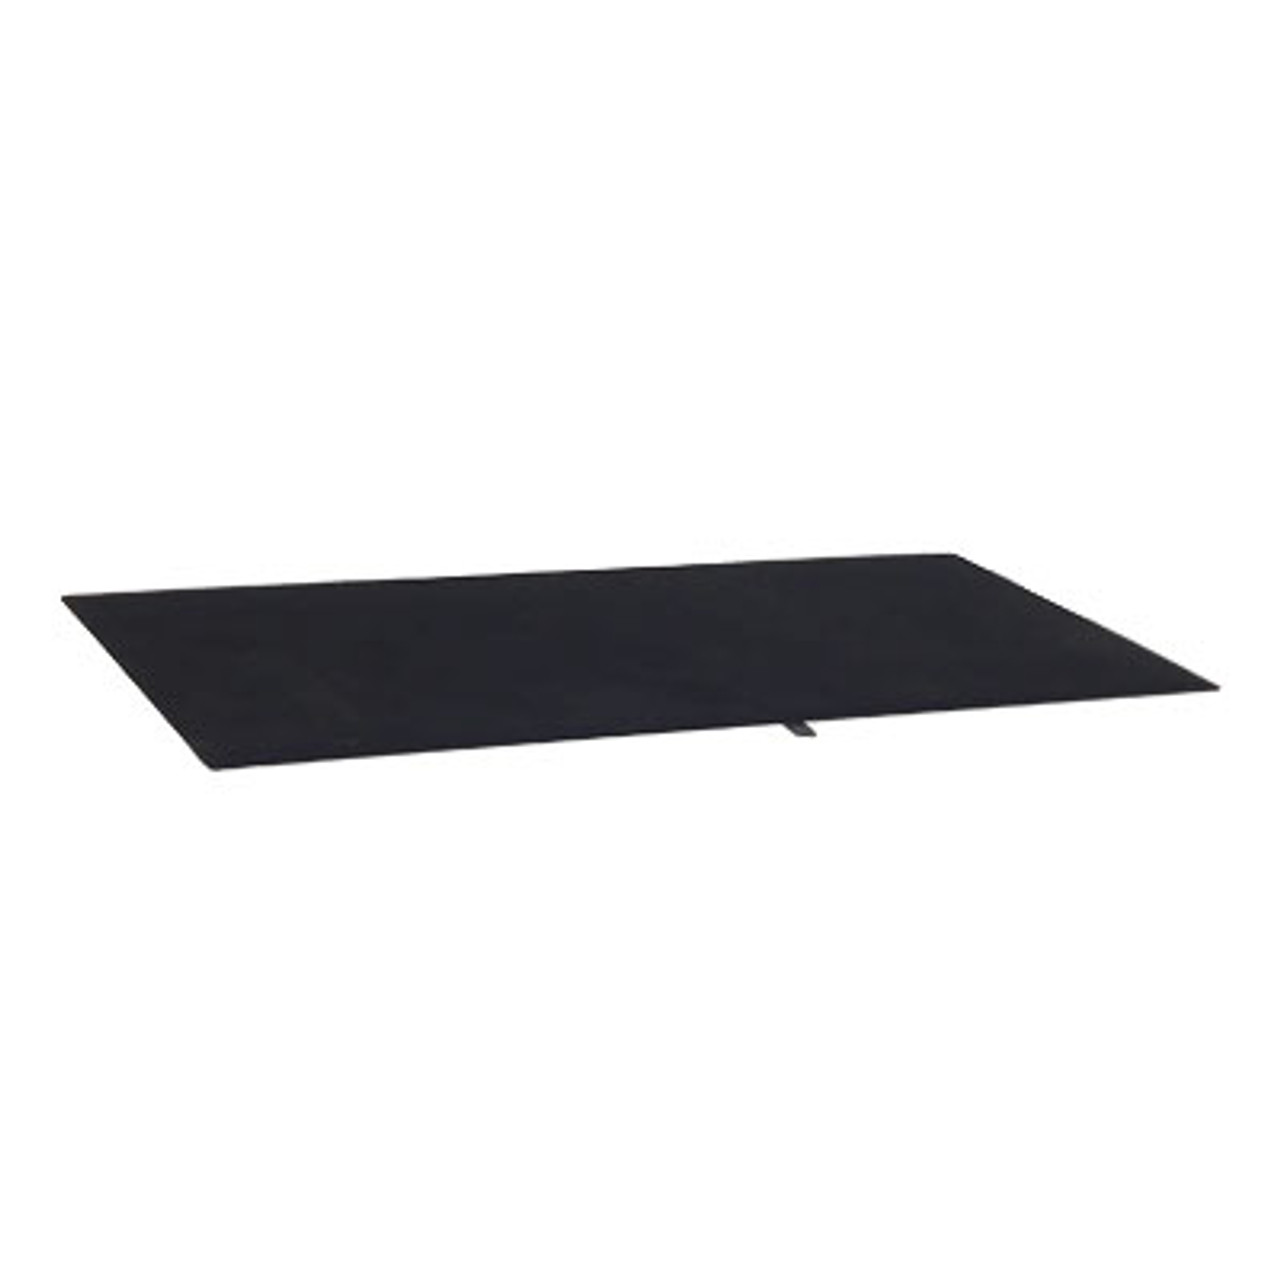 Large Black Velvet Pad - 14"-1/8" x 7-5/8" fits in Large jewellery trays